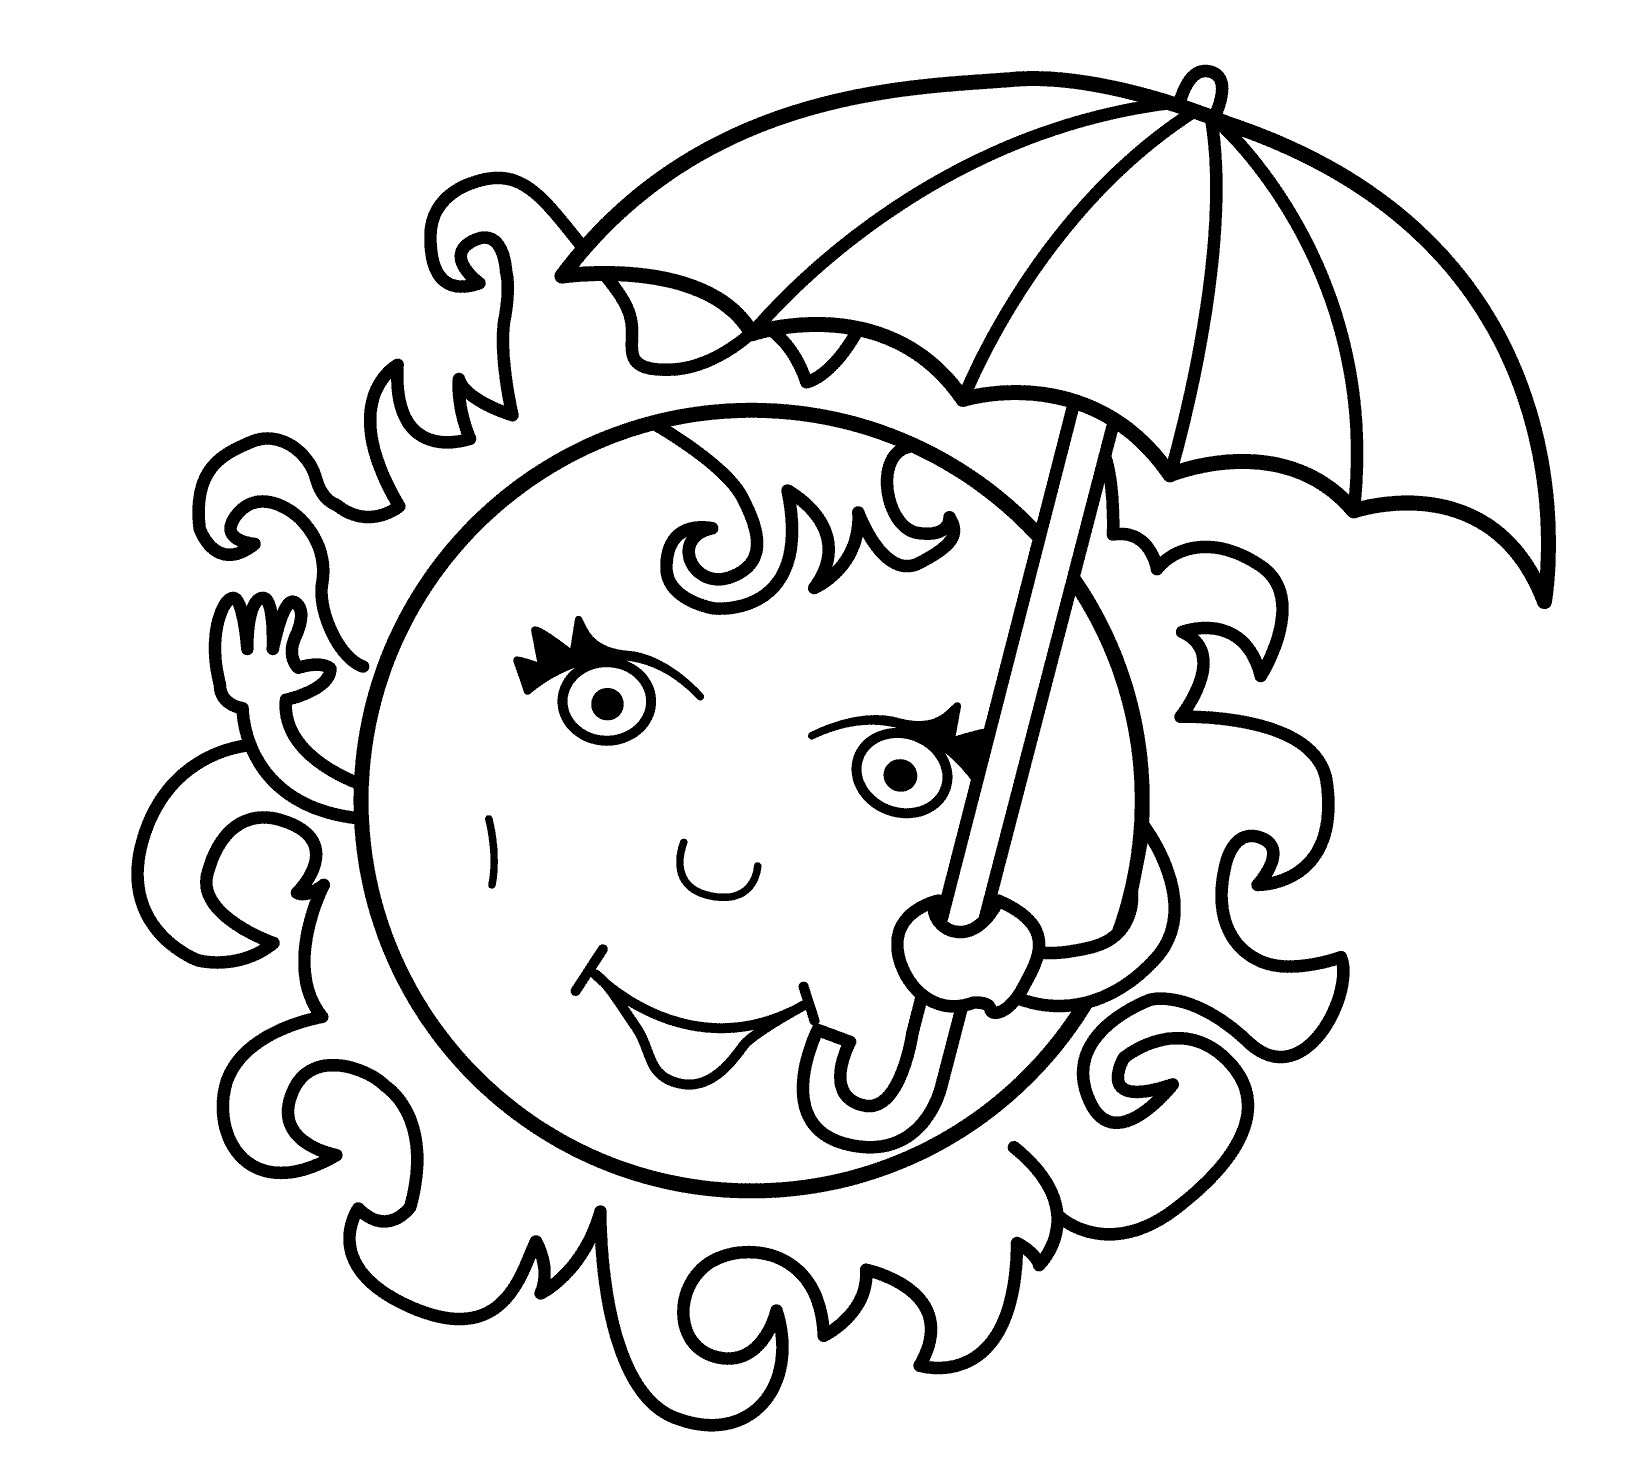 Download Coloring Pages
 Download Free Printable Summer Coloring Pages for Kids